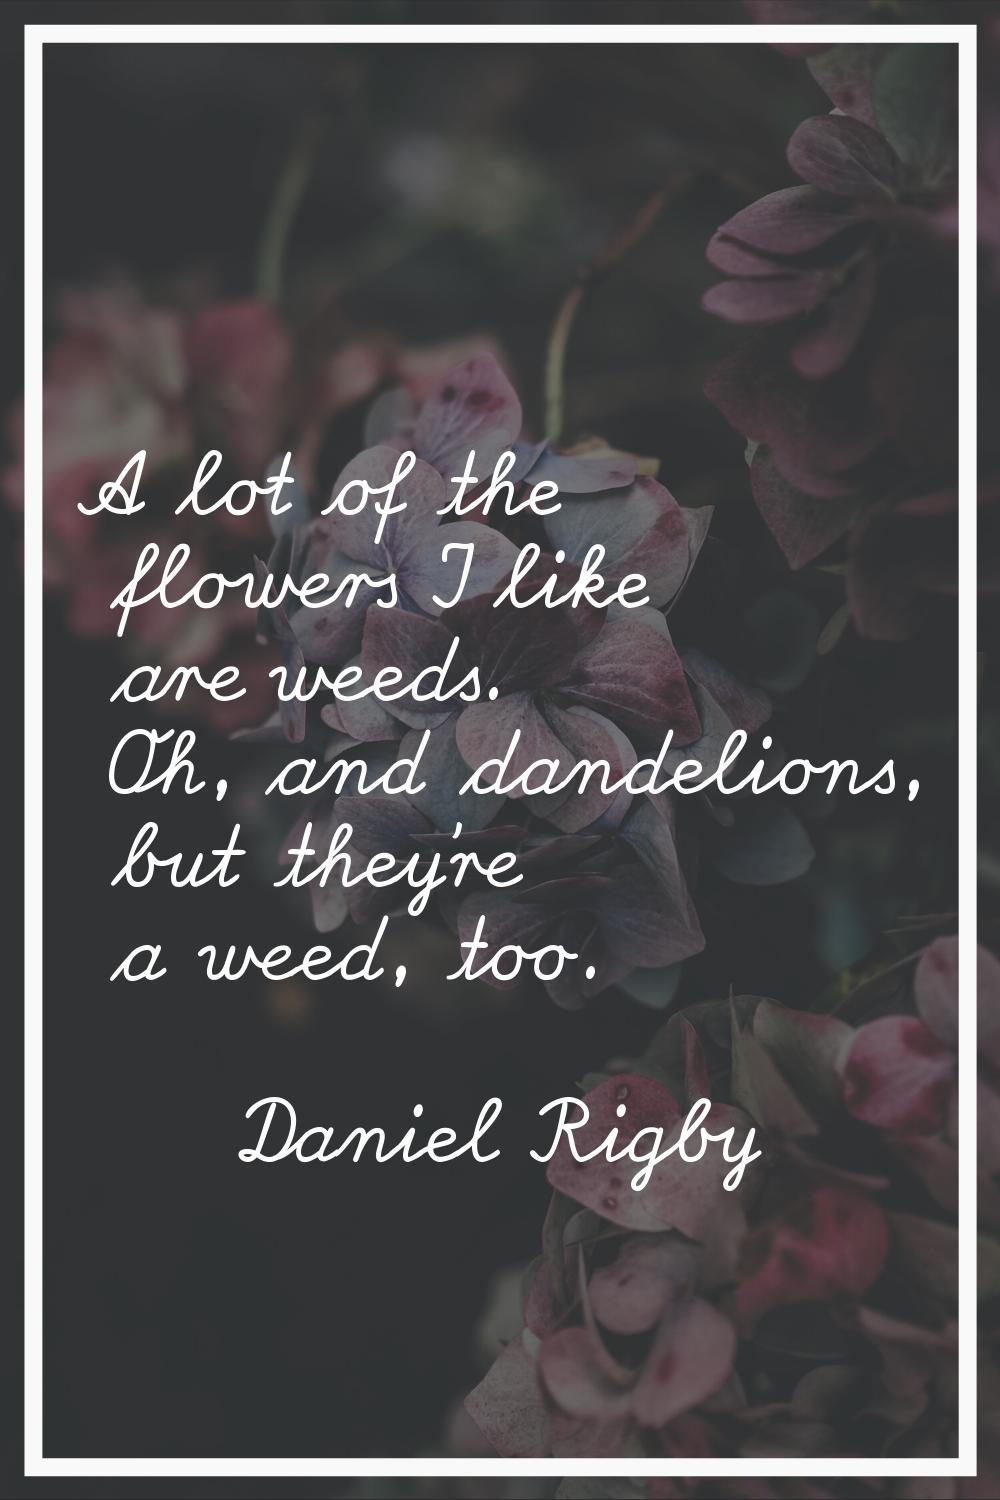 A lot of the flowers I like are weeds. Oh, and dandelions, but they're a weed, too.